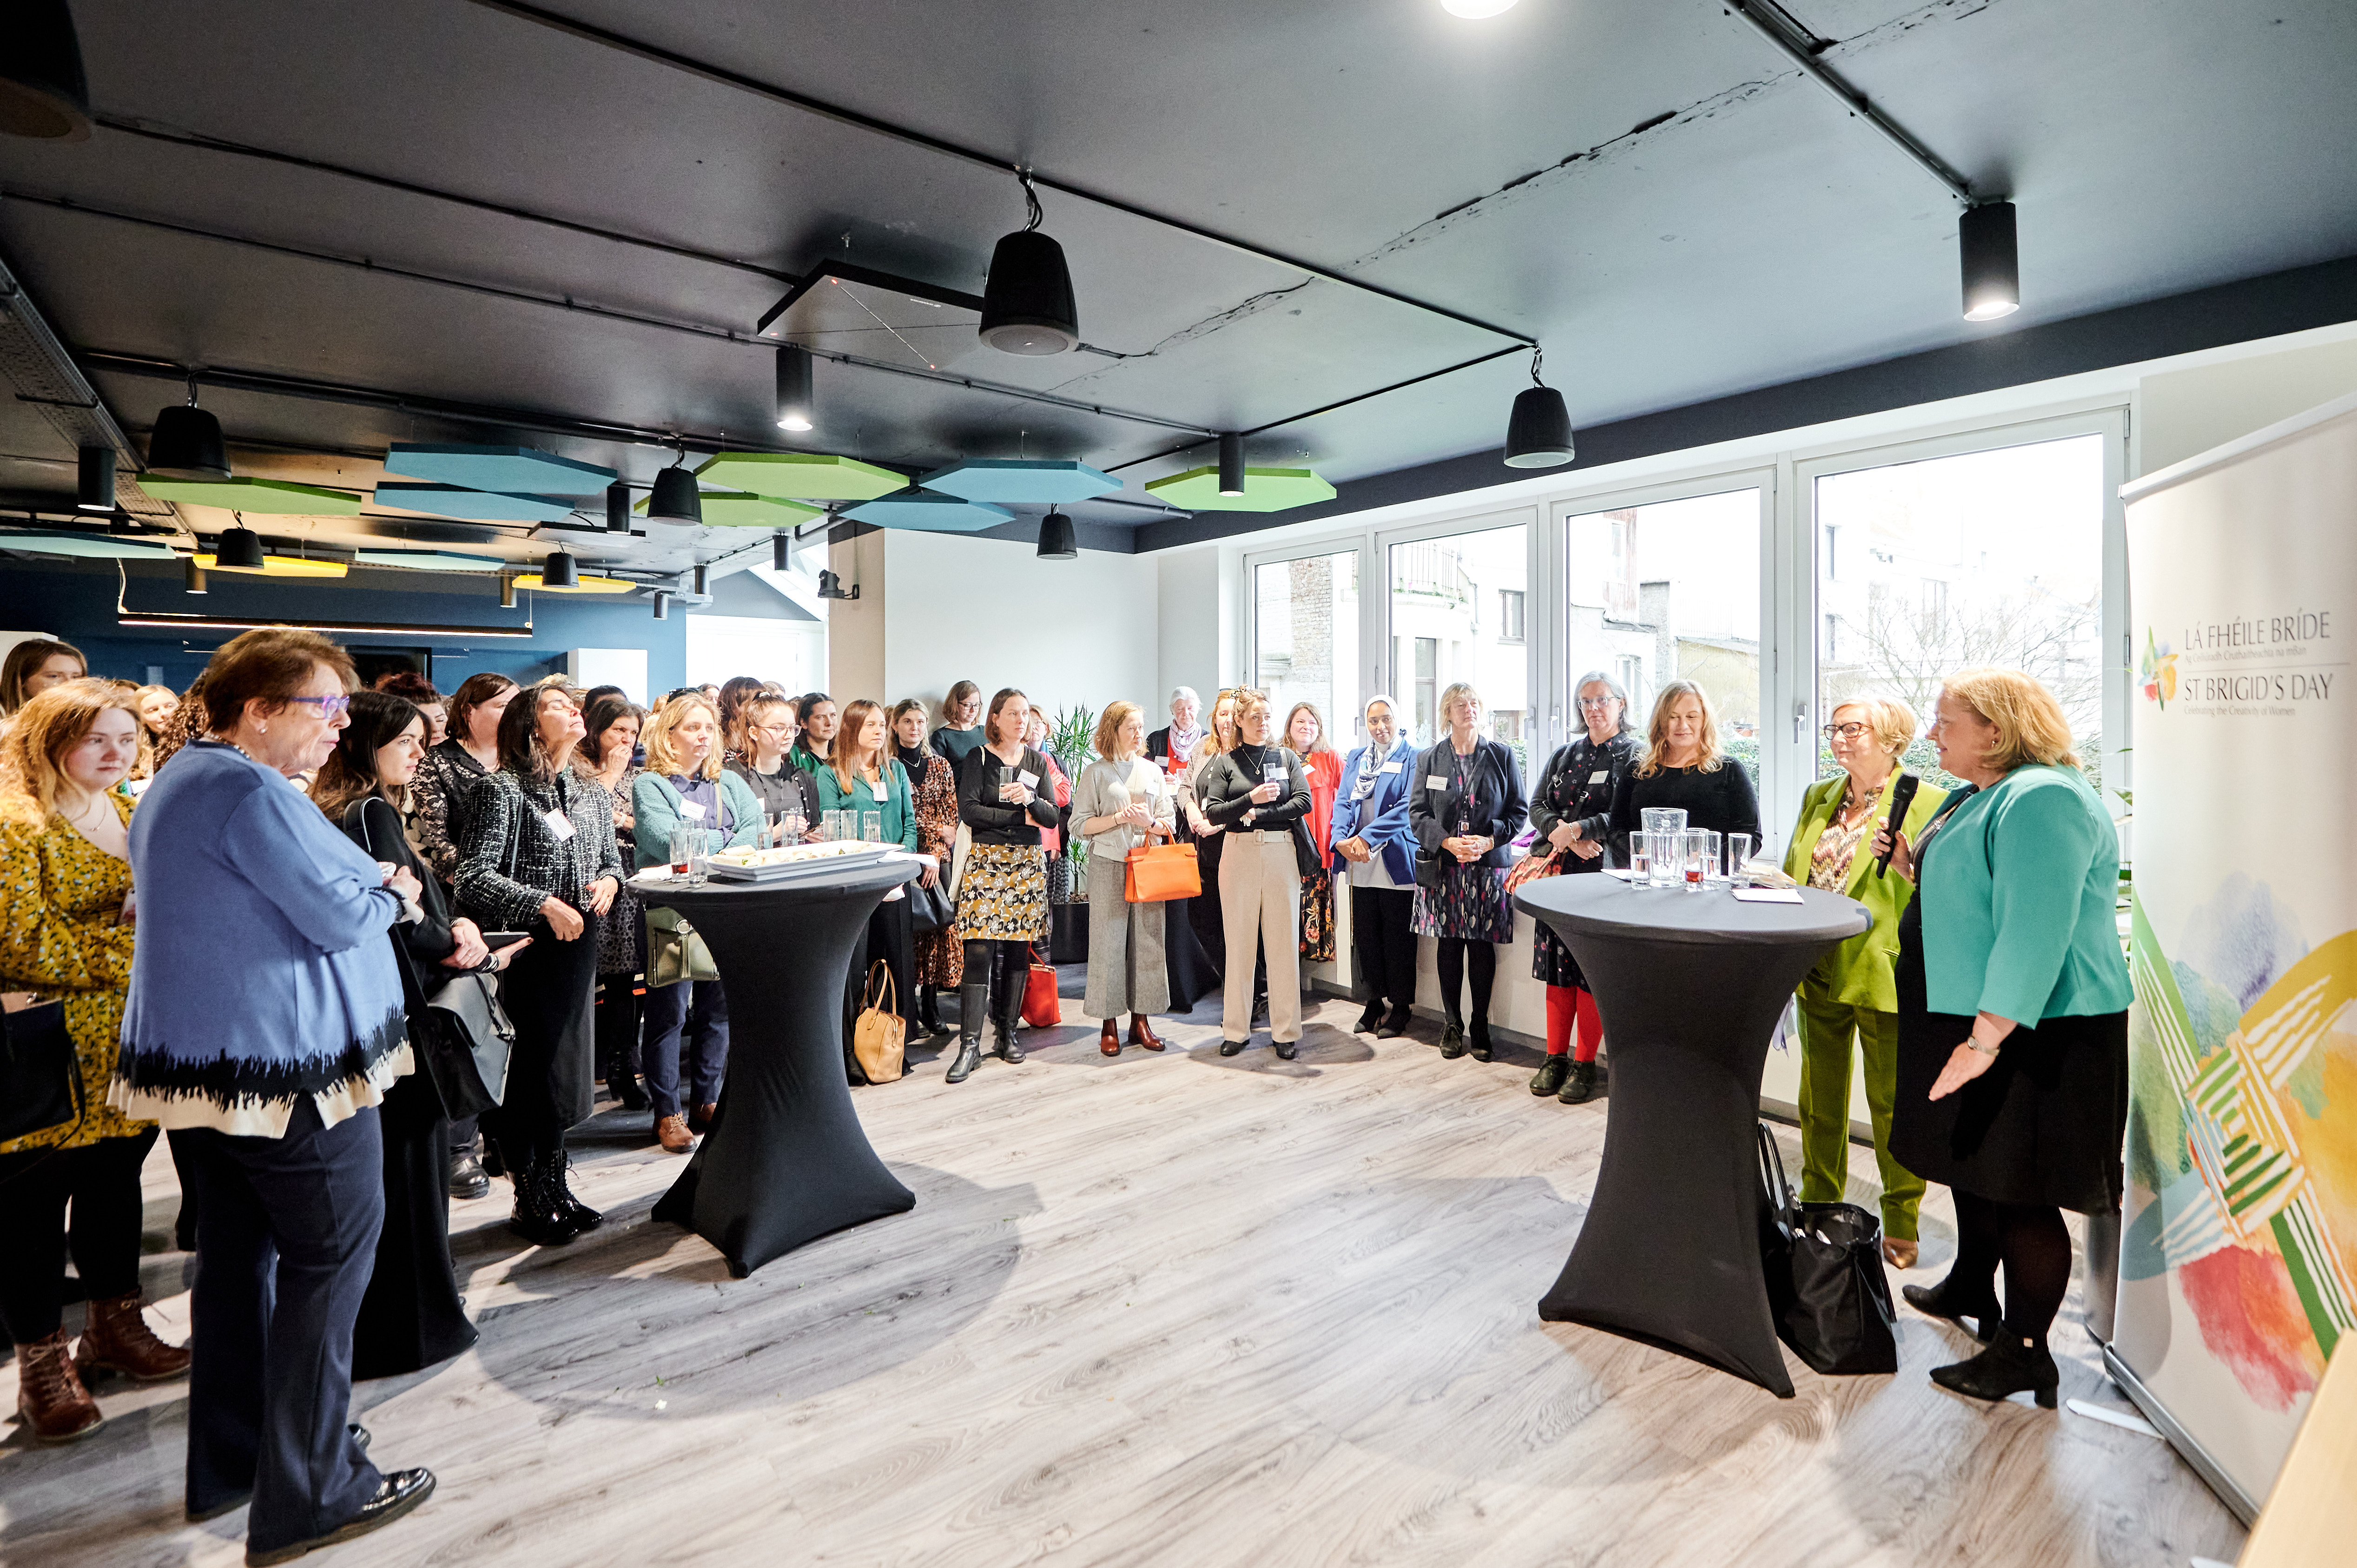 Saint Brigid's Day networking event held in Brussels on 1 February 2023.